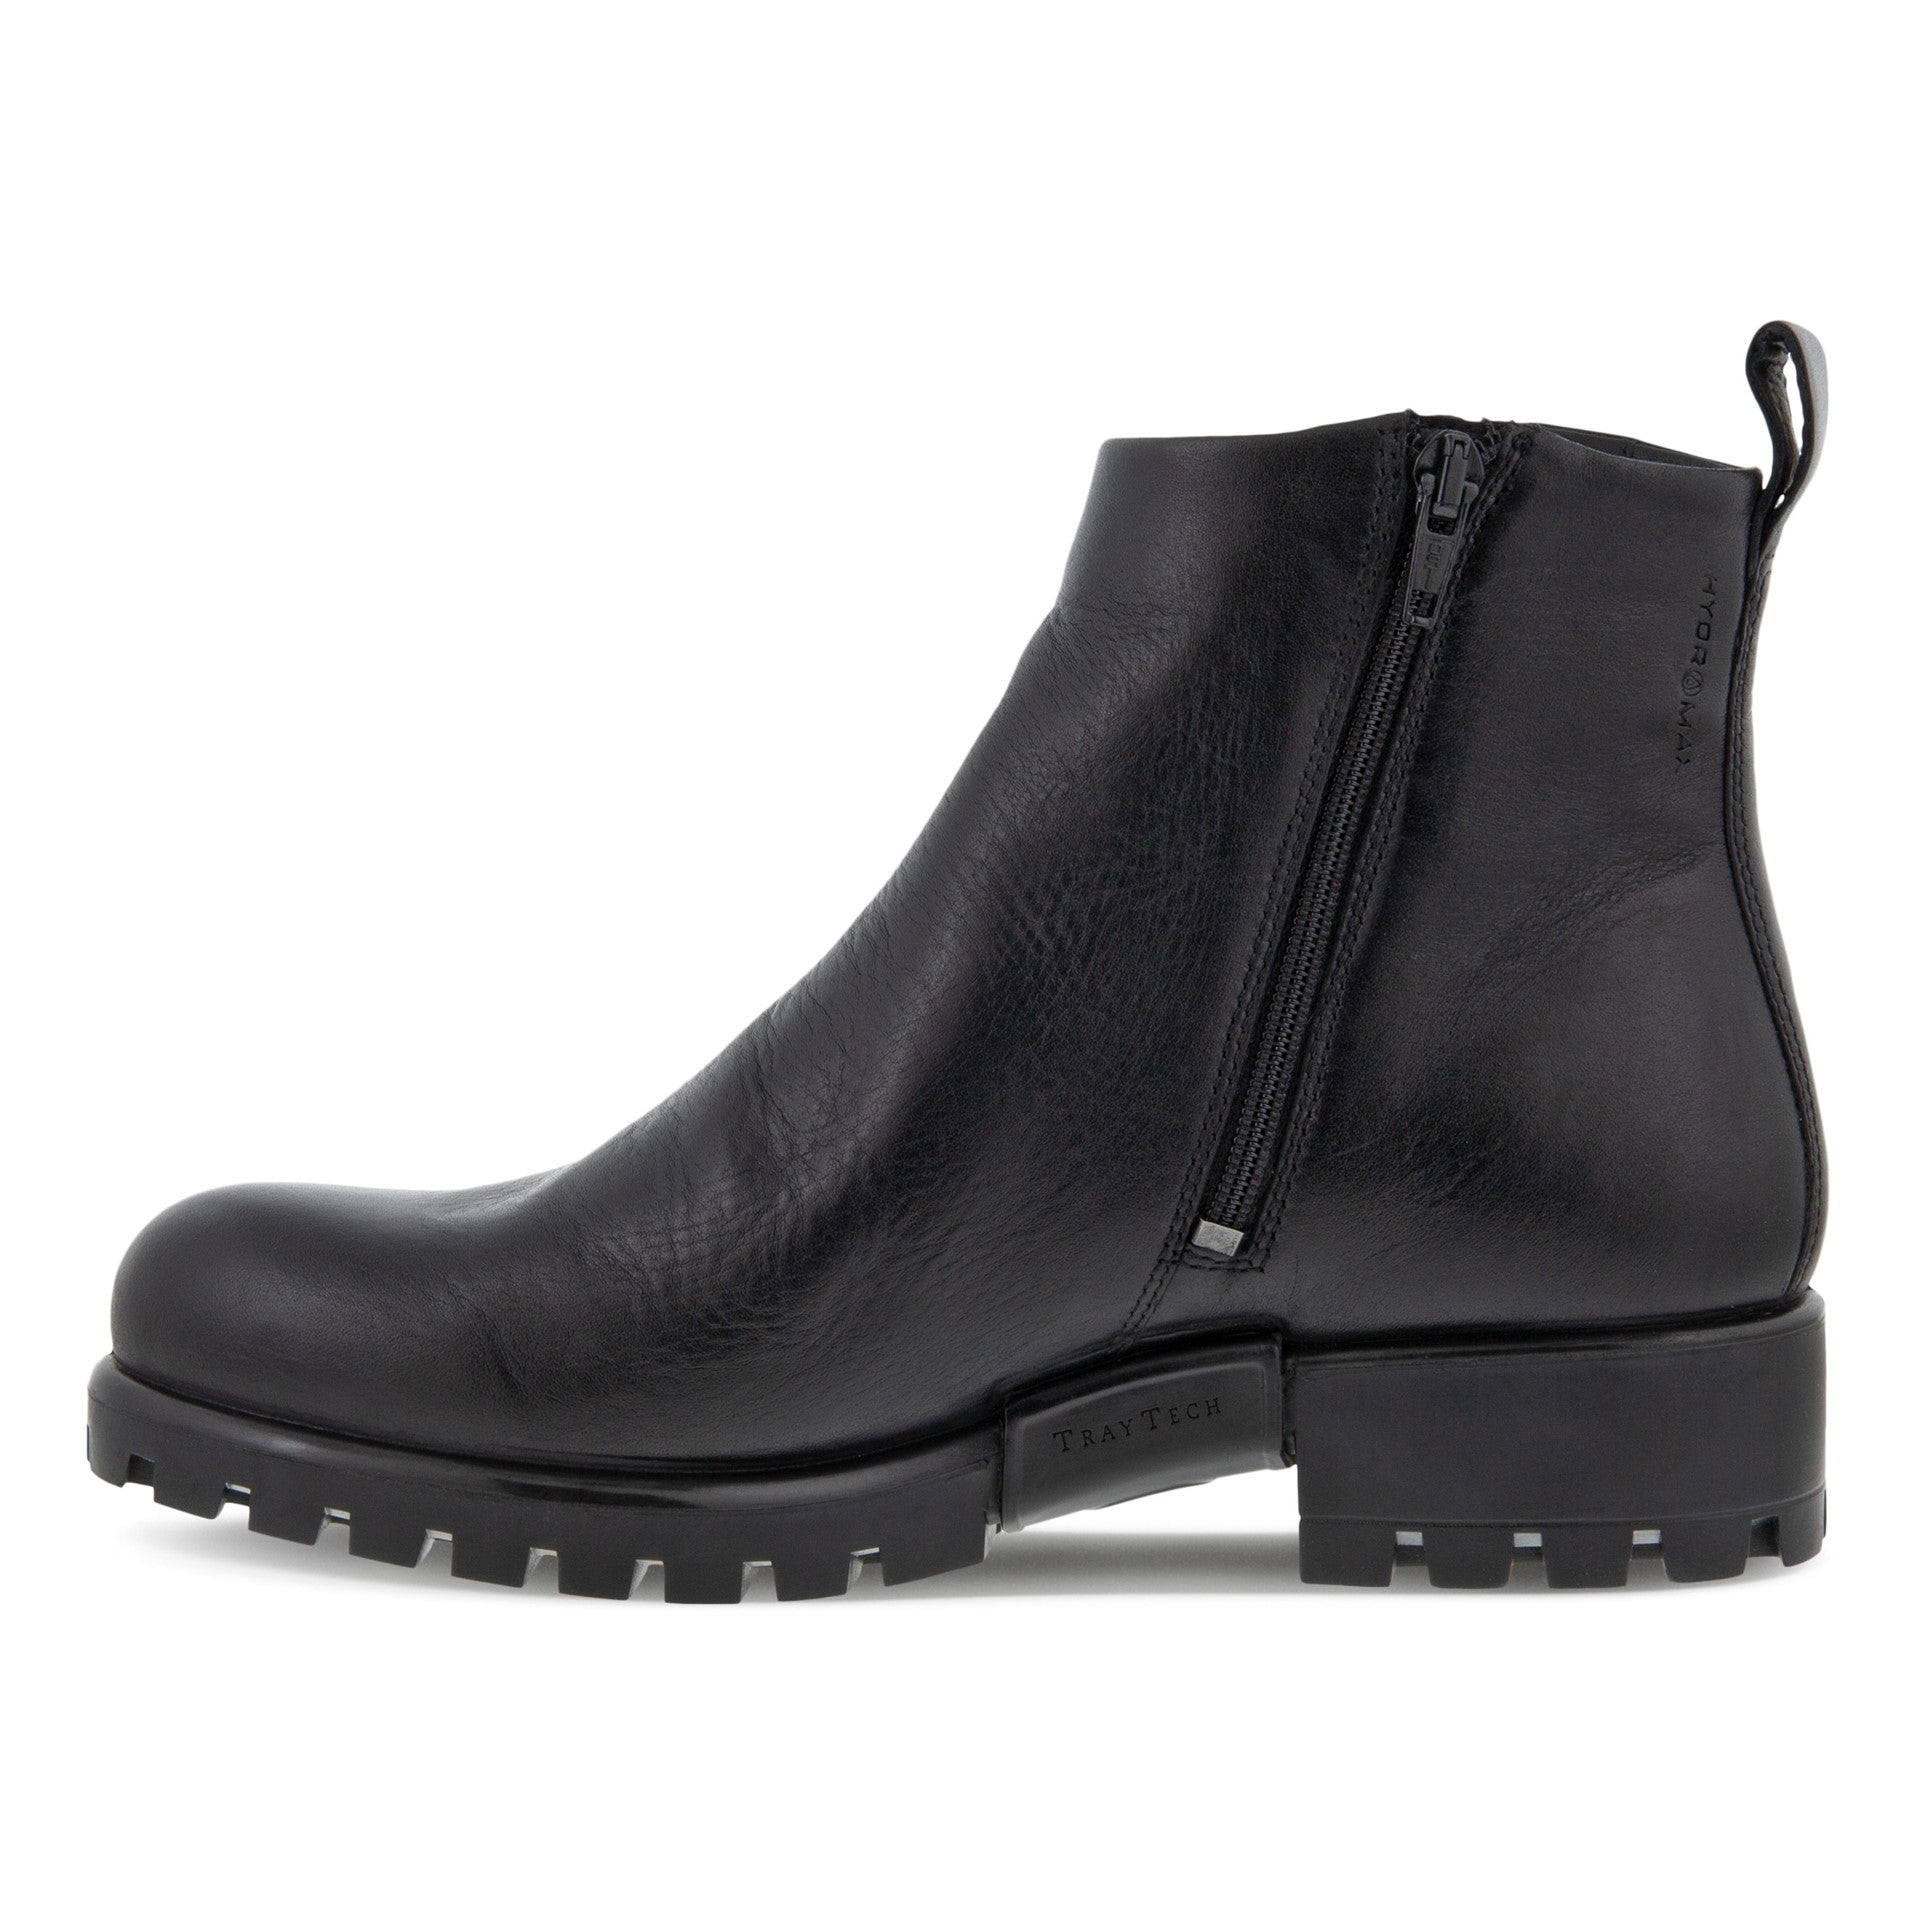 ECCO Modtray Ankle Boot Women's